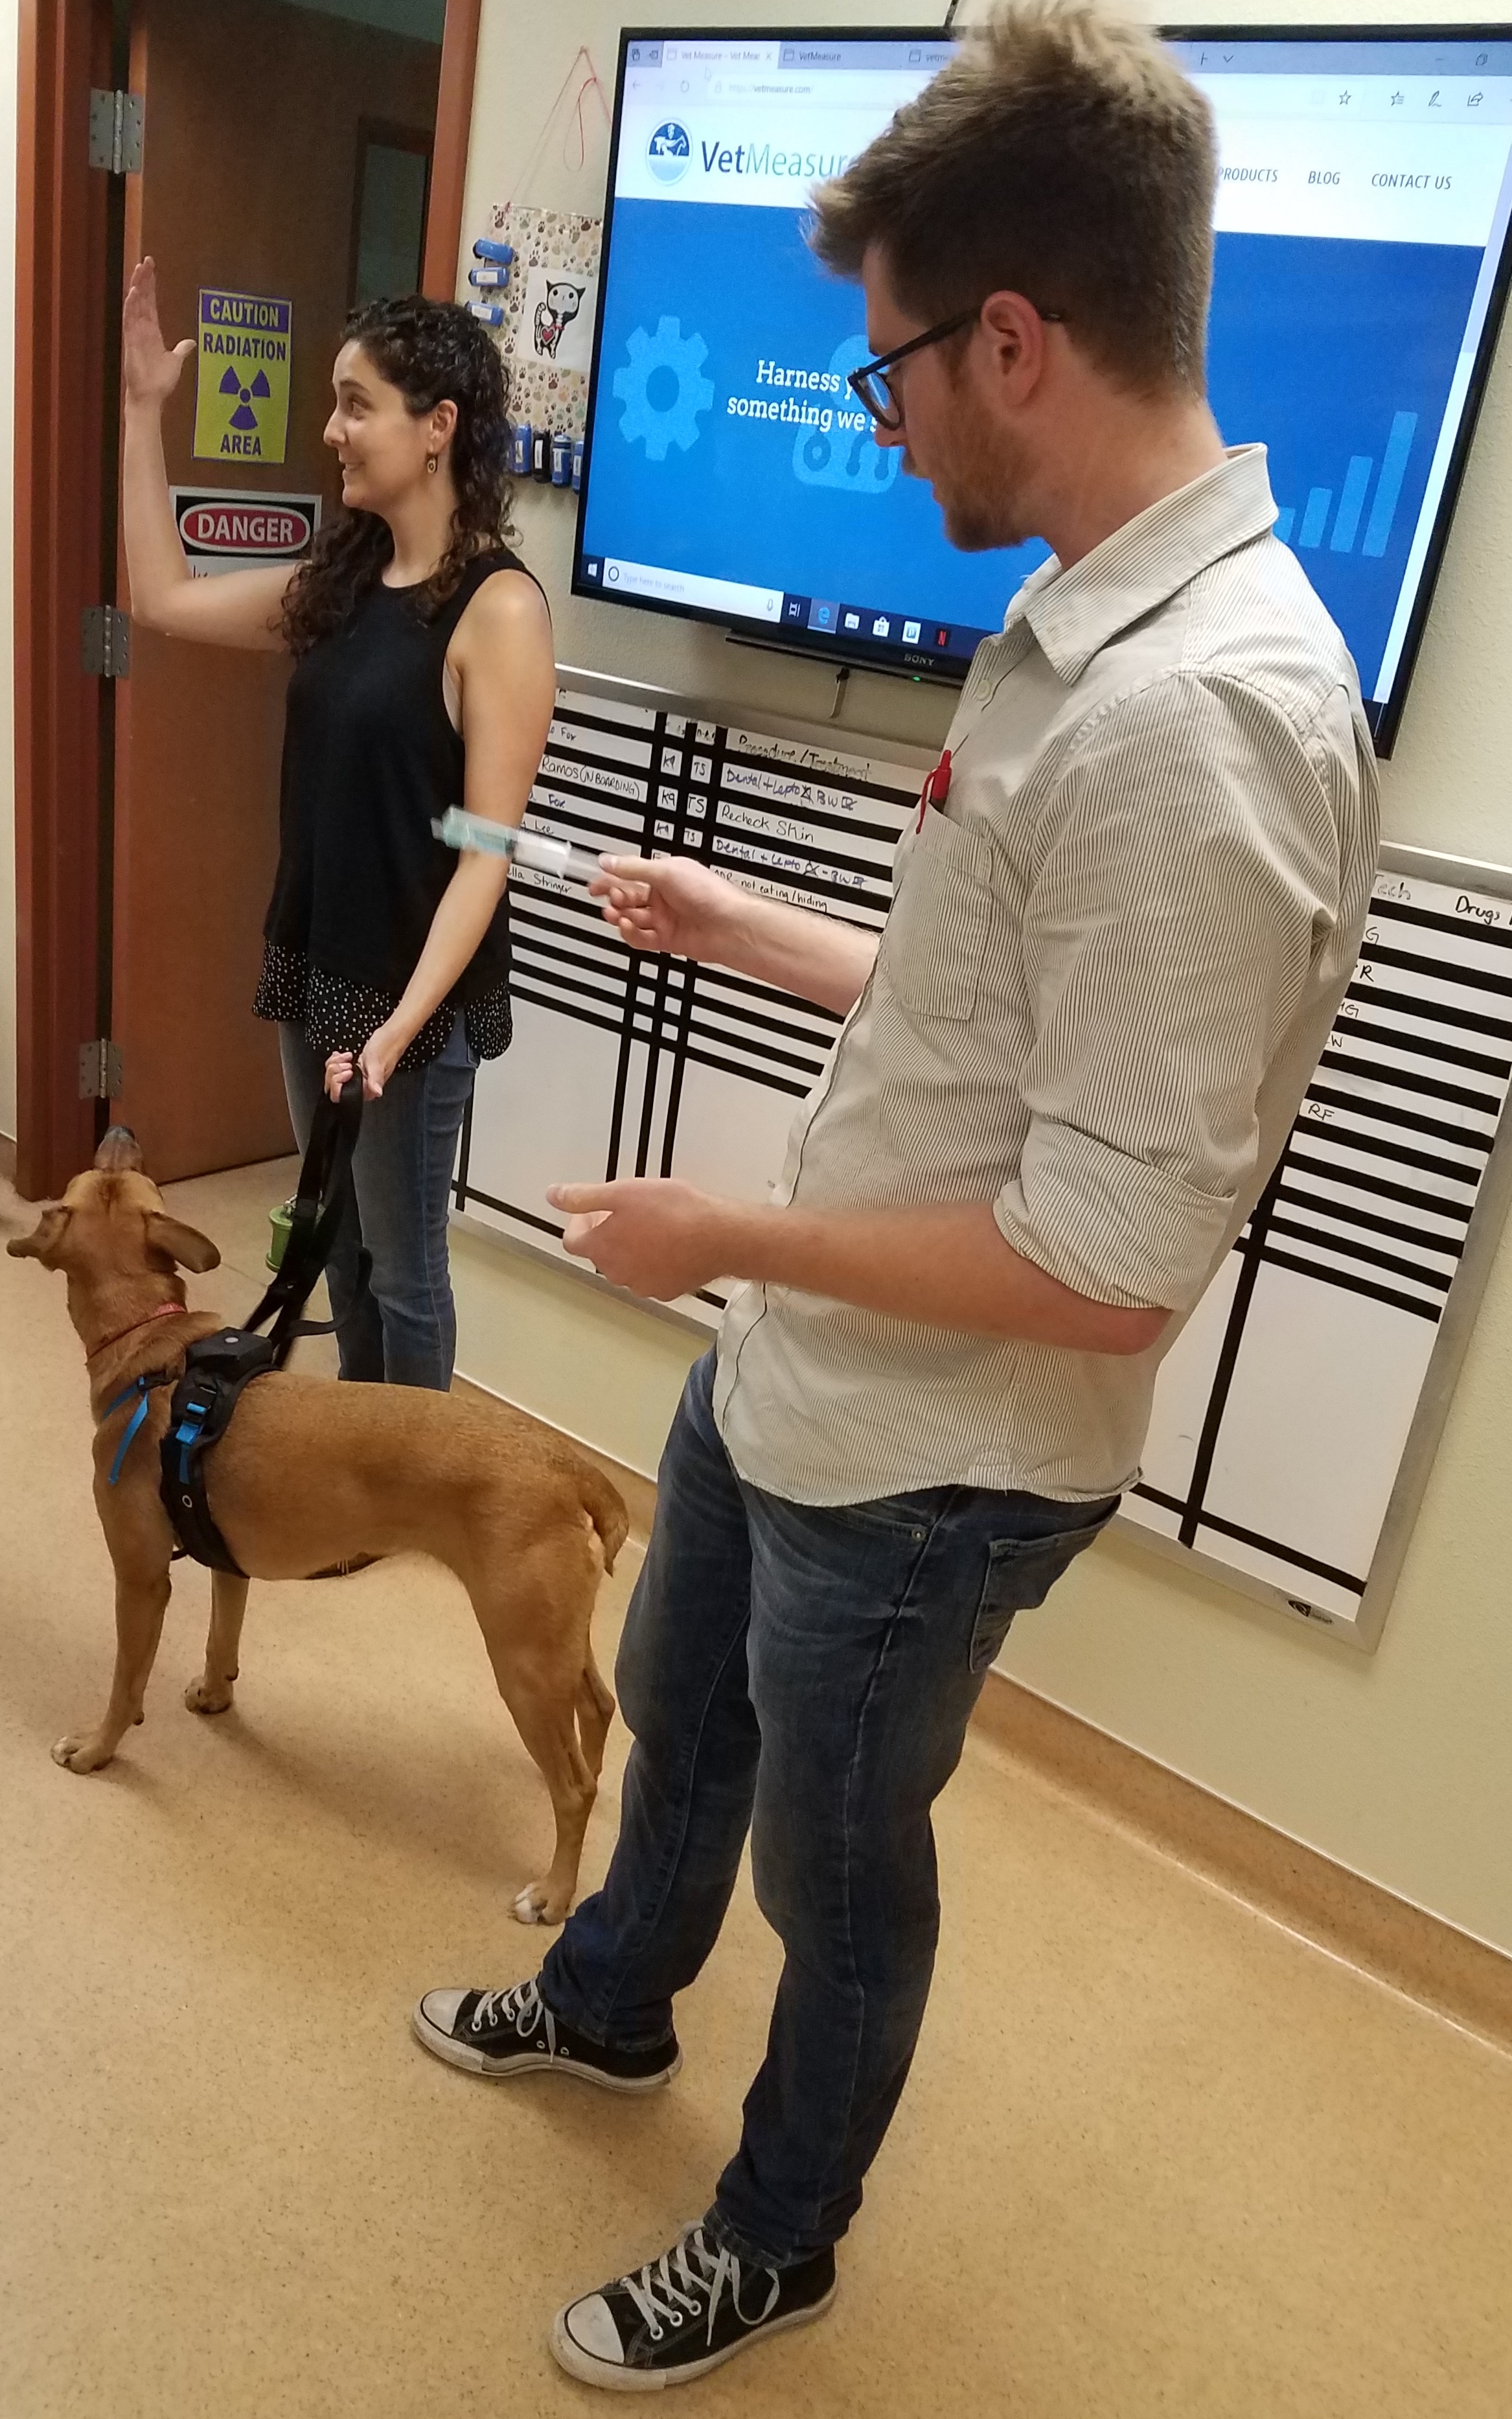 Two VetMeasure representatives standing in front of a TV presenting the VetMeasure website. A dog is standing in front of the female representative. 